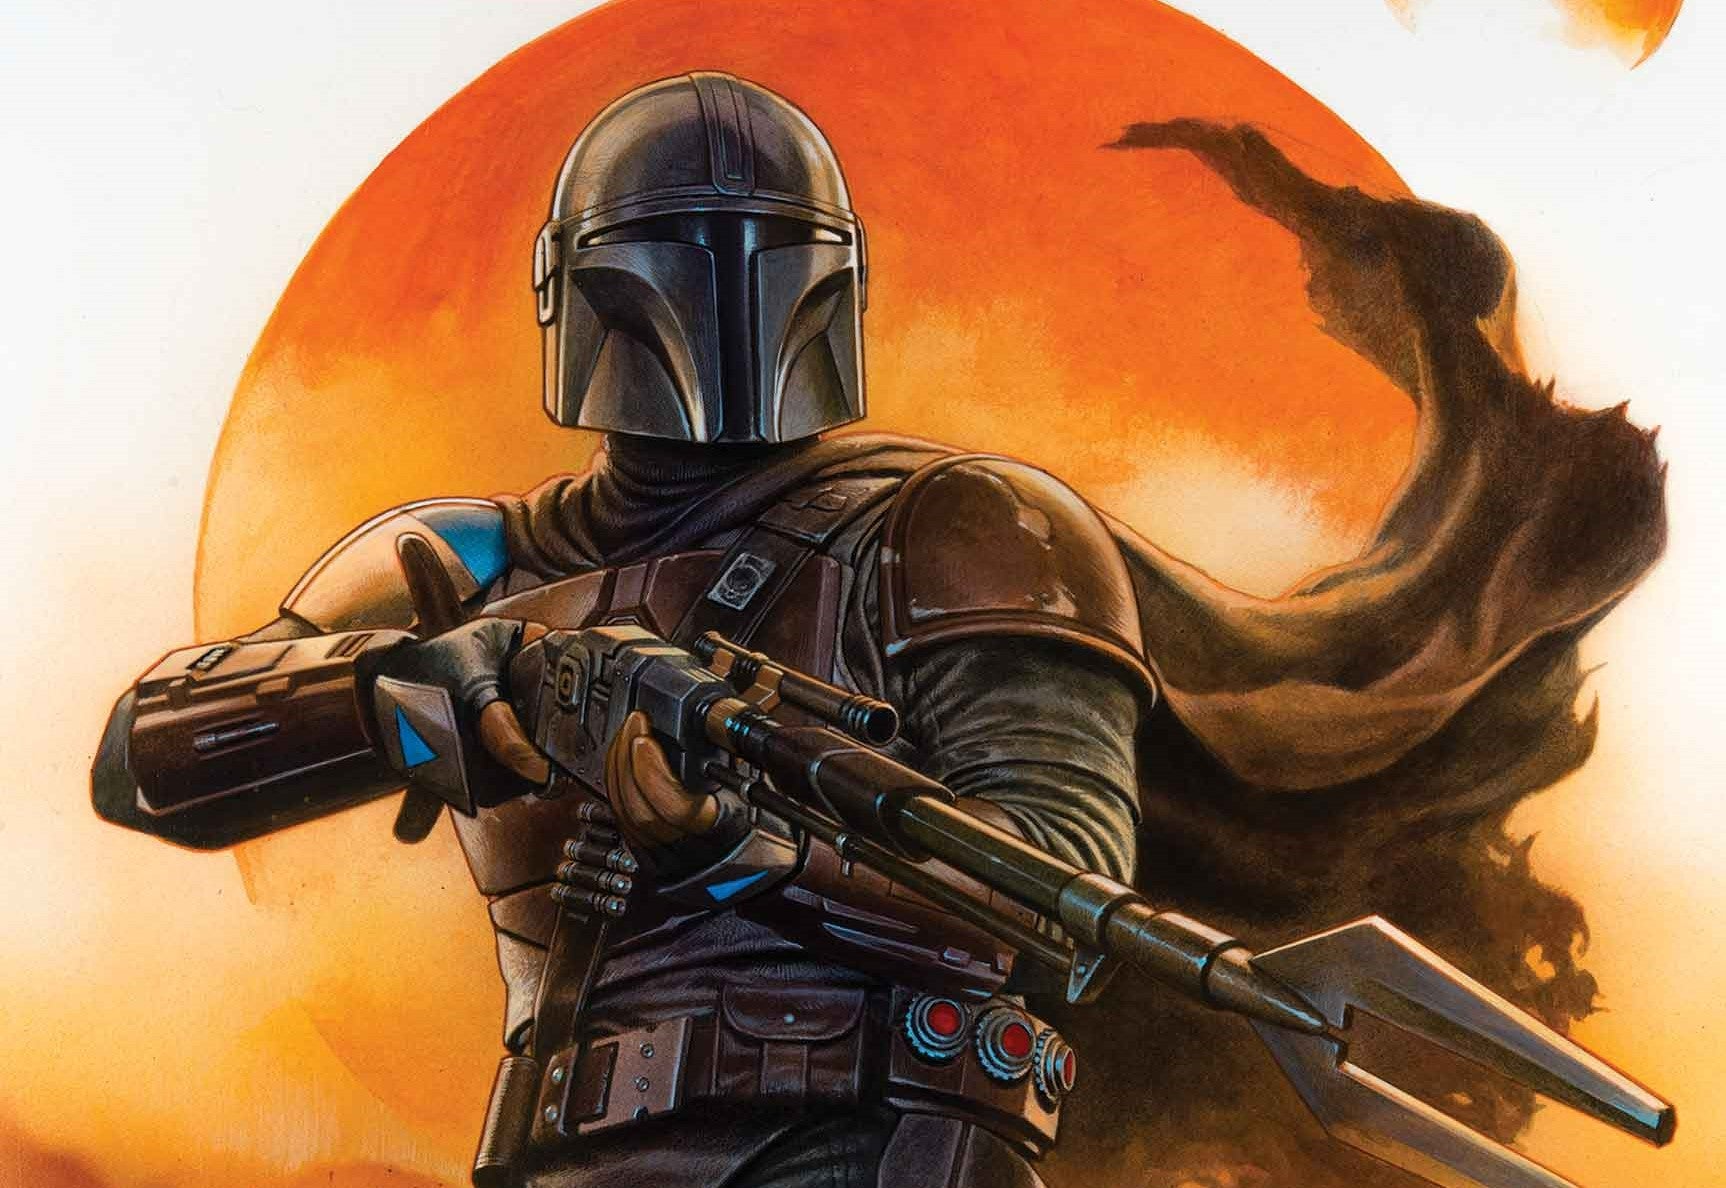 Marvel The Mandalorian Comic cover are issue one, The Mandalorian is holding a Mandalorian rifle while his cape flows behind him